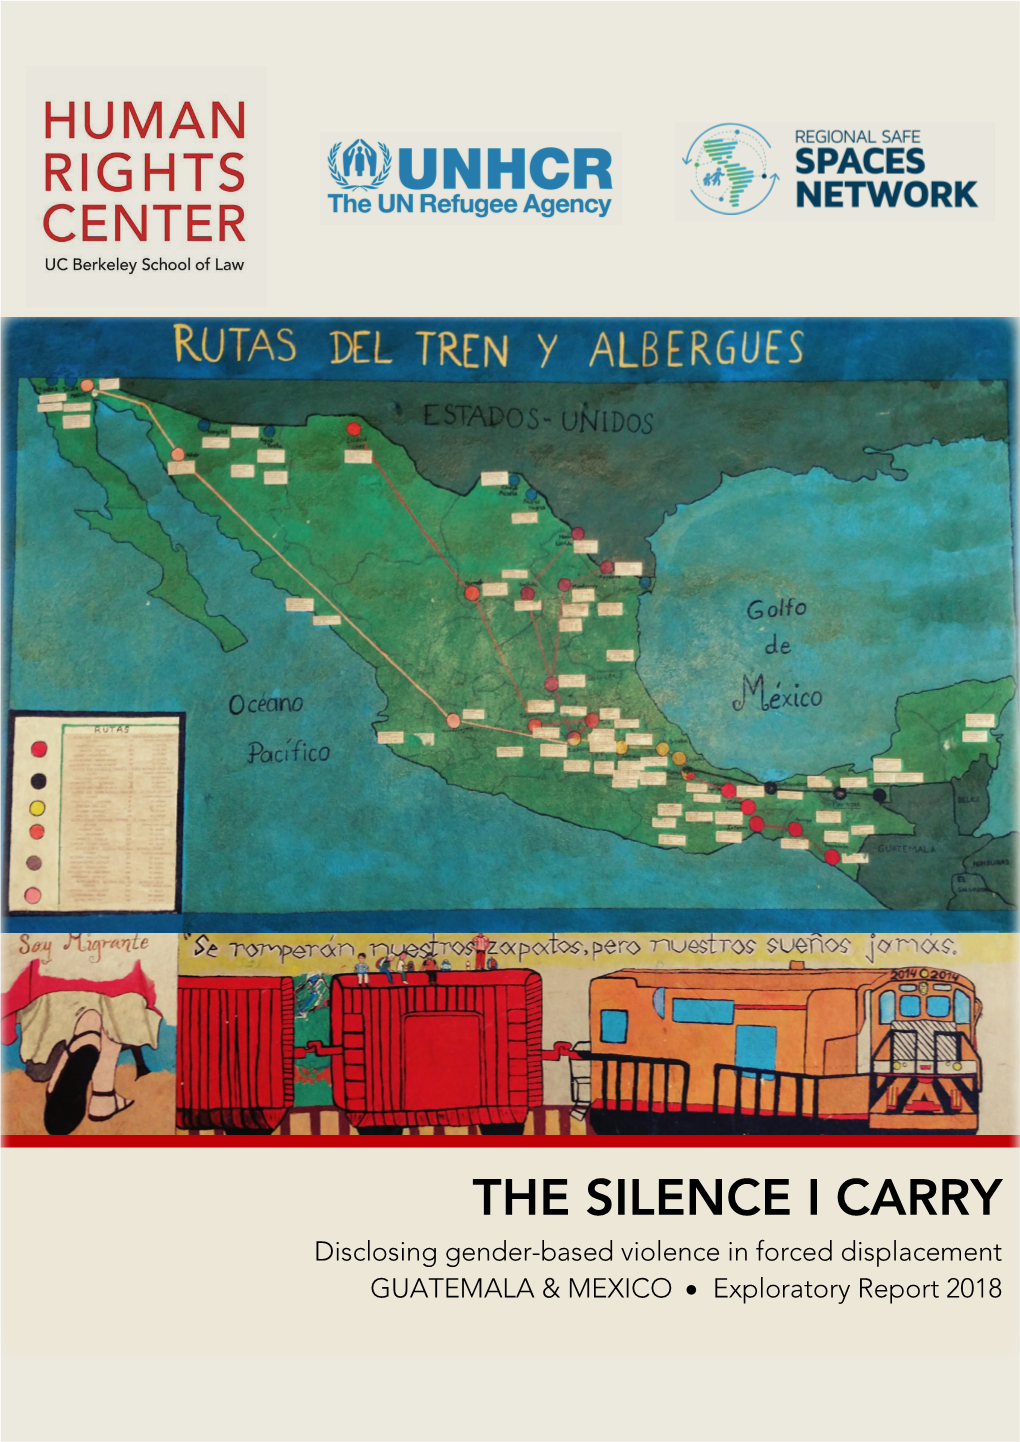 THE SILENCE I CARRY Disclosing Gender-Based Violence in Forced Displacement GUATEMALA & MEXICO • Exploratory Report 2018